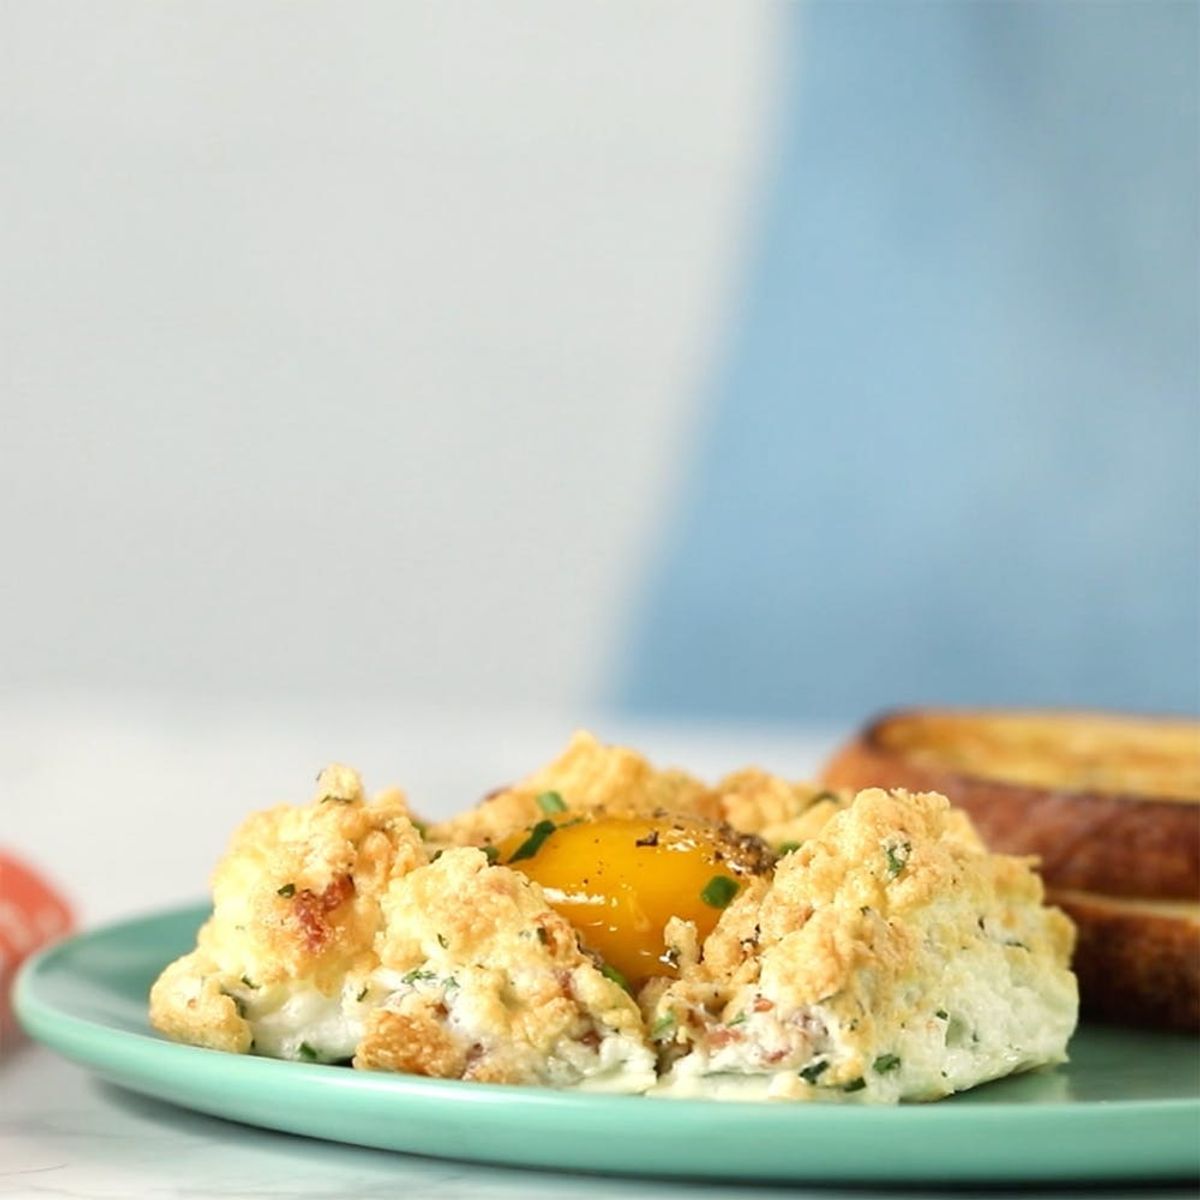 Treat Yourself This A.M. With This Fancy AF Egg Clouds Recipe